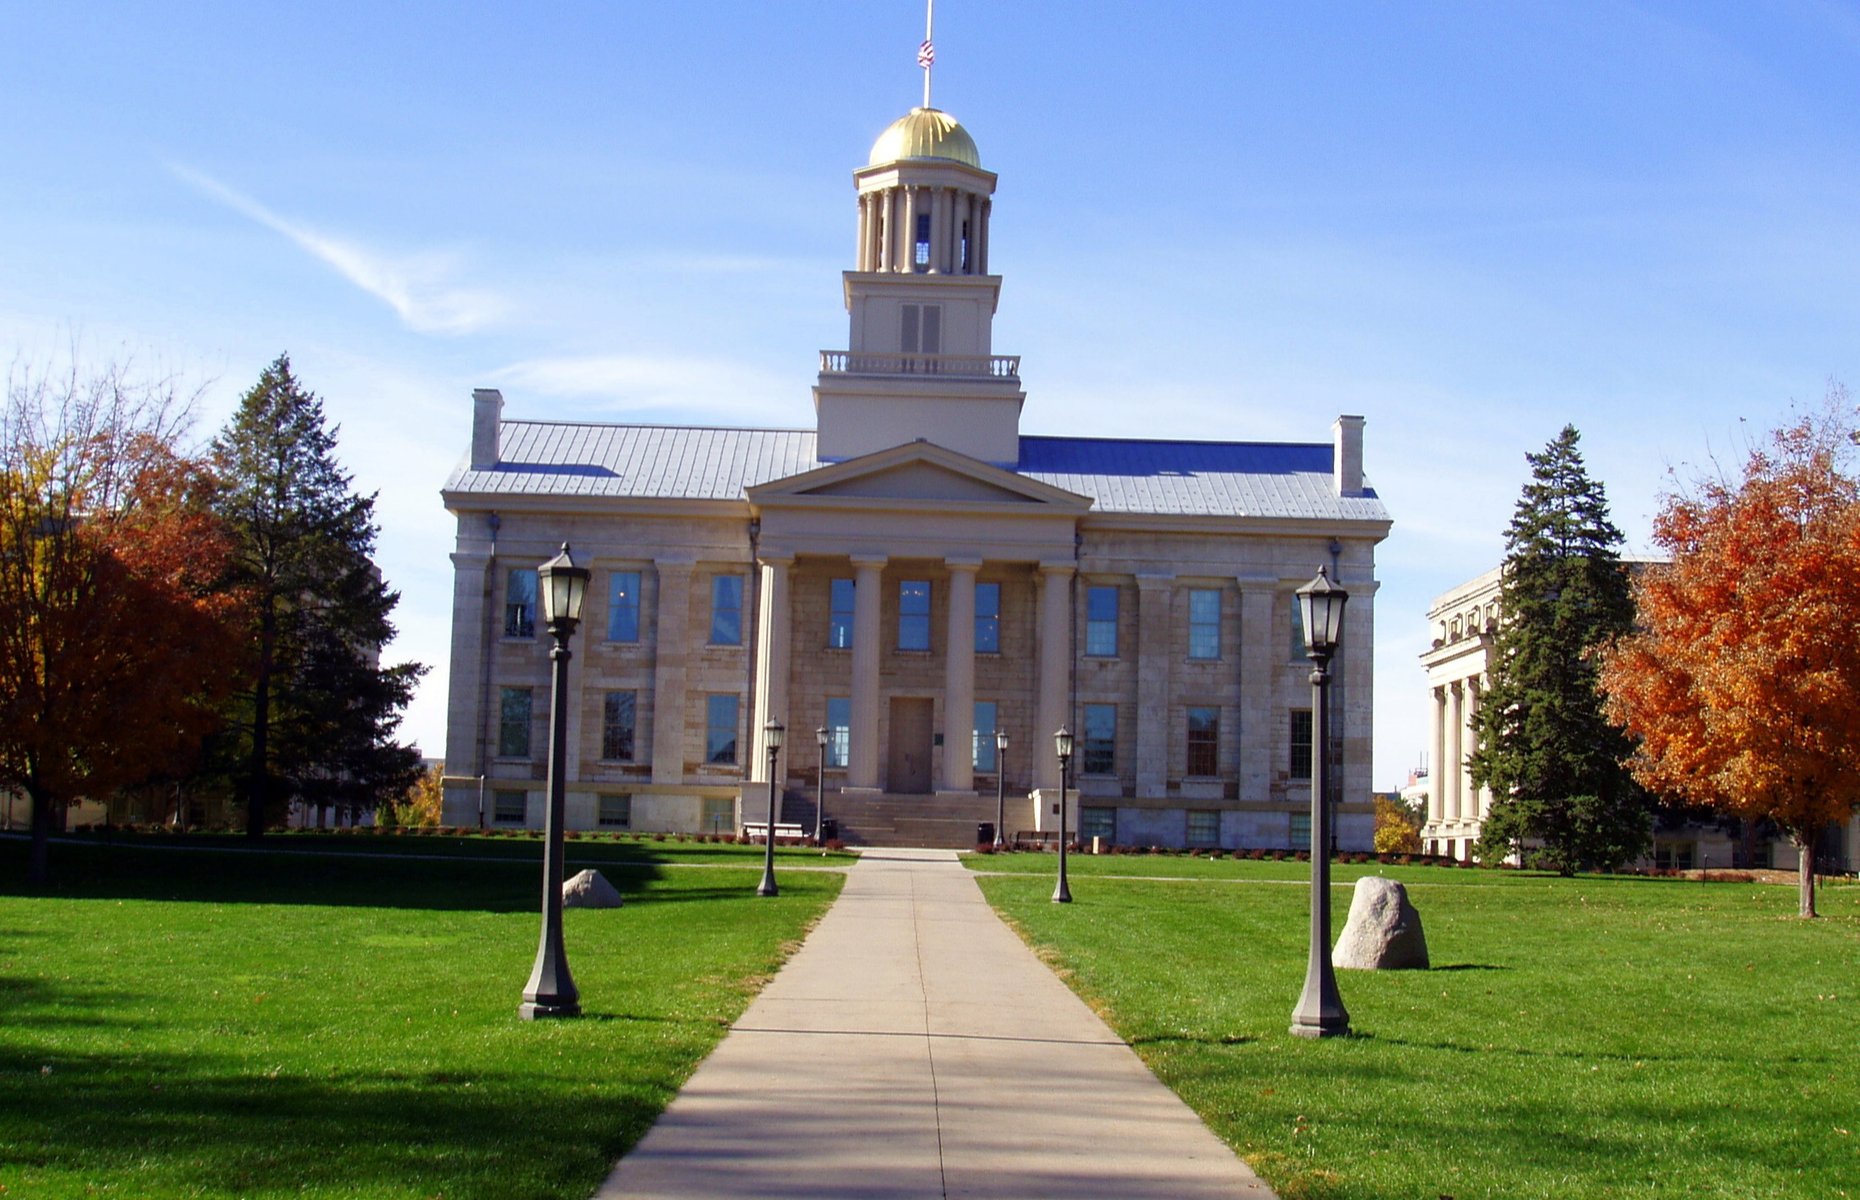 <p>The <a href="https://uiowa.edu/" rel="noreferrer noopener">University of Iowa</a> is home to the imposing Old Capitol building, formerly the seat of the state government and now a National Historic Landmark and museum dedicated to the humanities.</p>